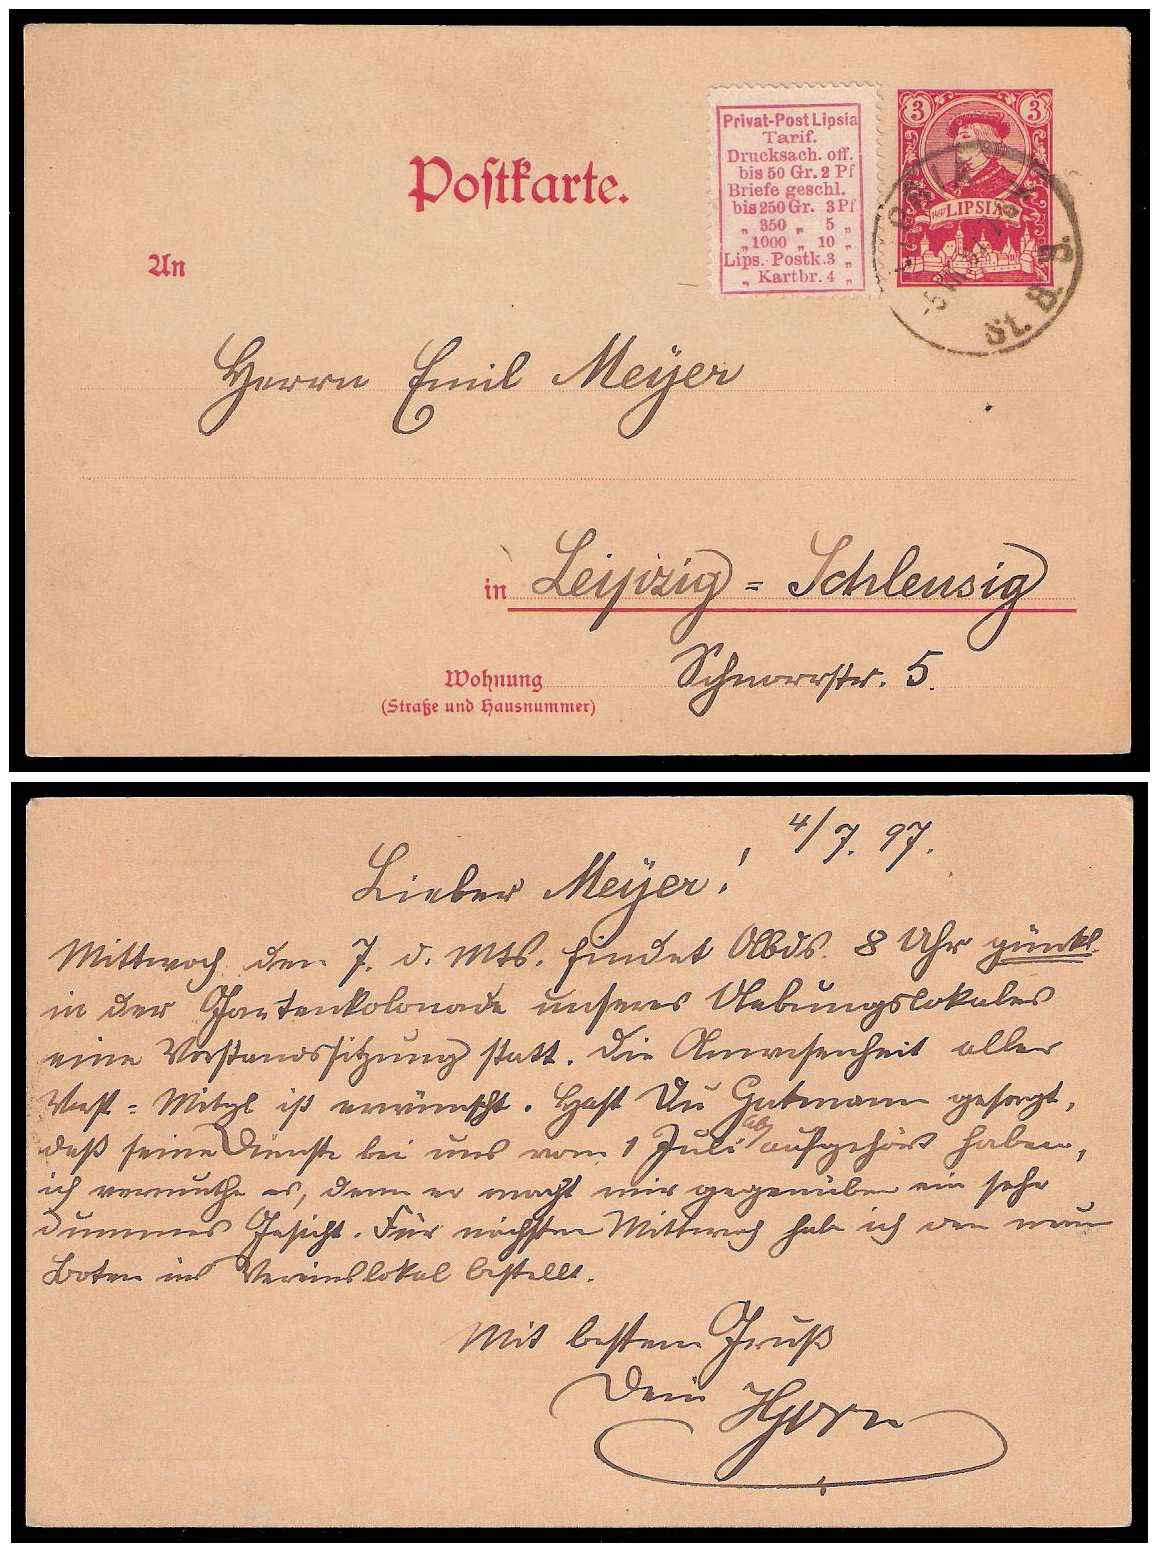 7.1897 Germany Private Mail Leipzig Mü F P7 collection 01